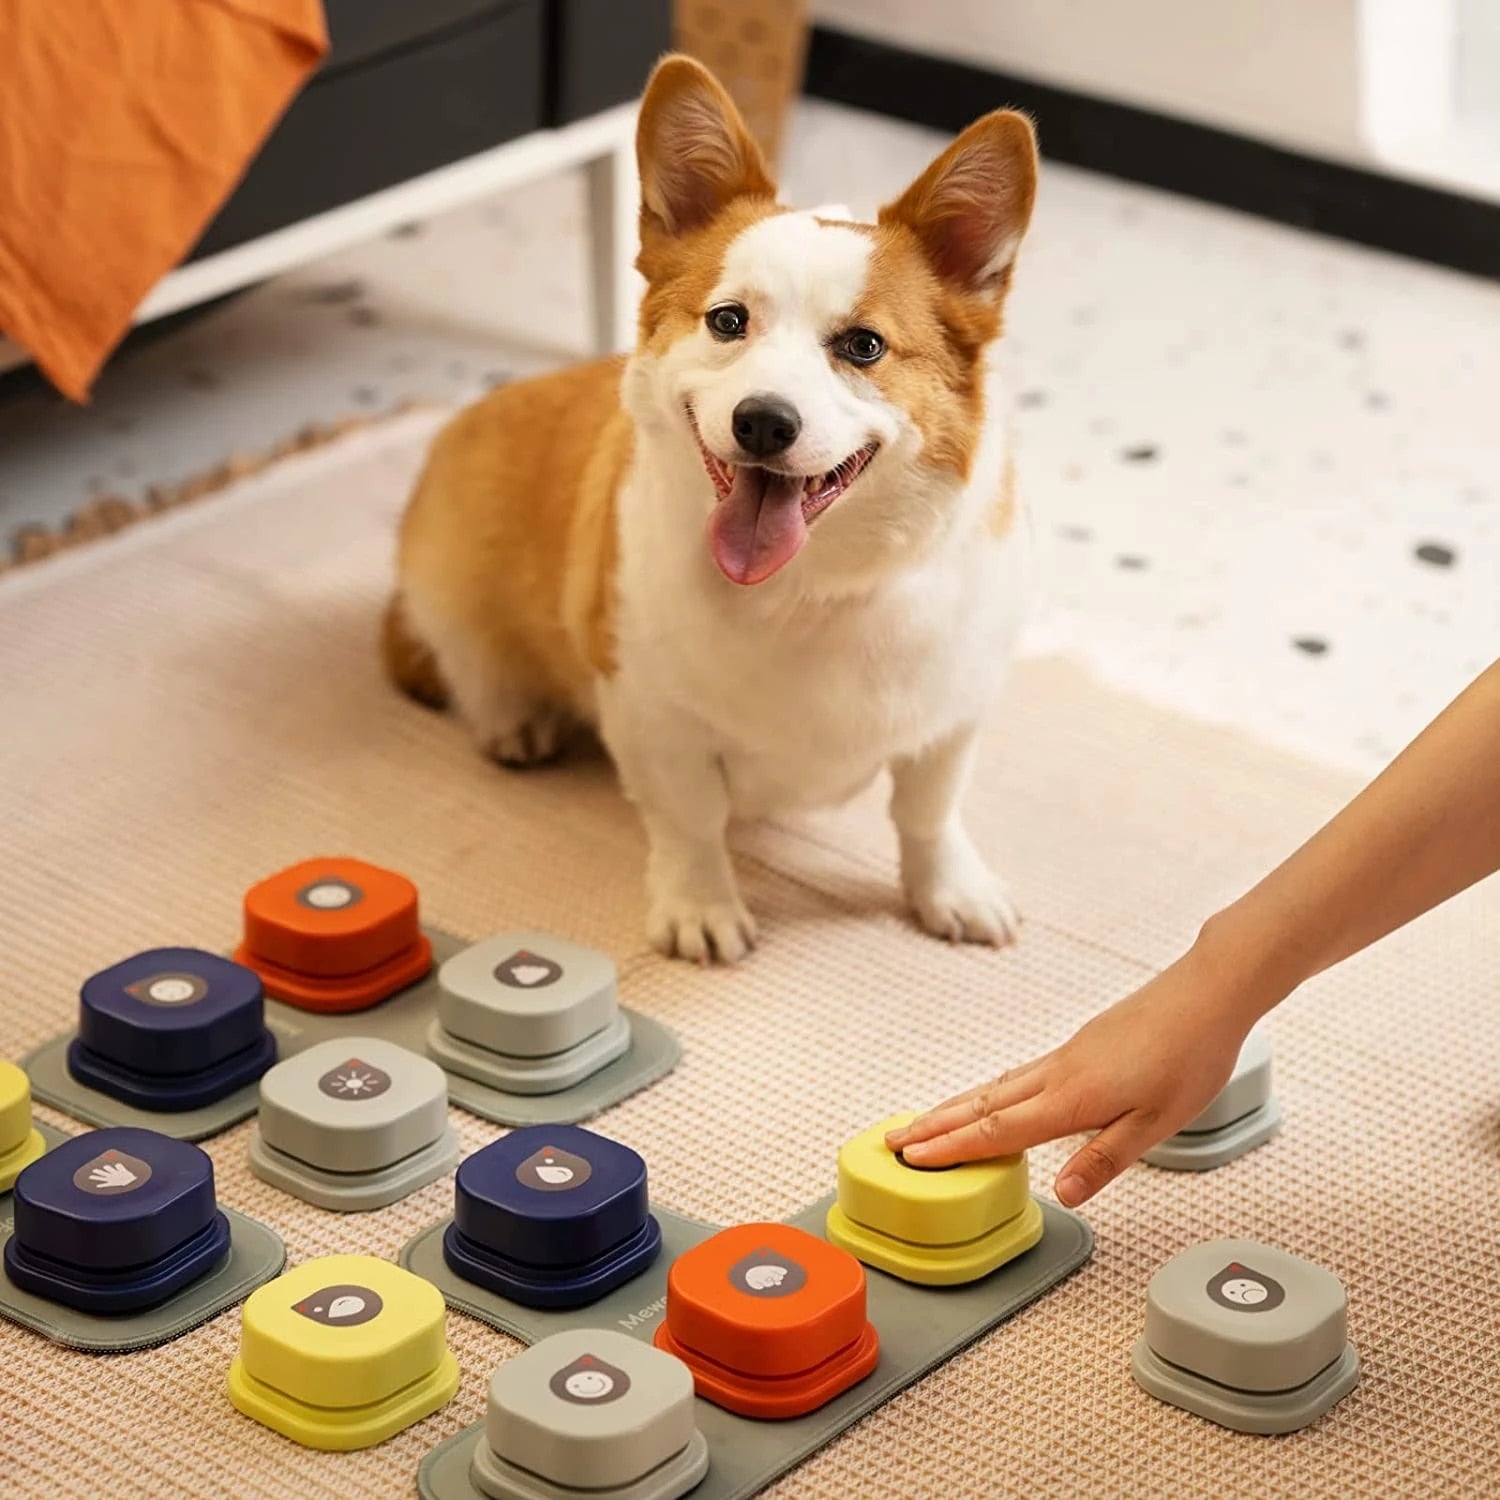 Dog Button Record Talking Pet Communication Vocal Training Interactive Toy Bell Ringer With Pad and Sticker